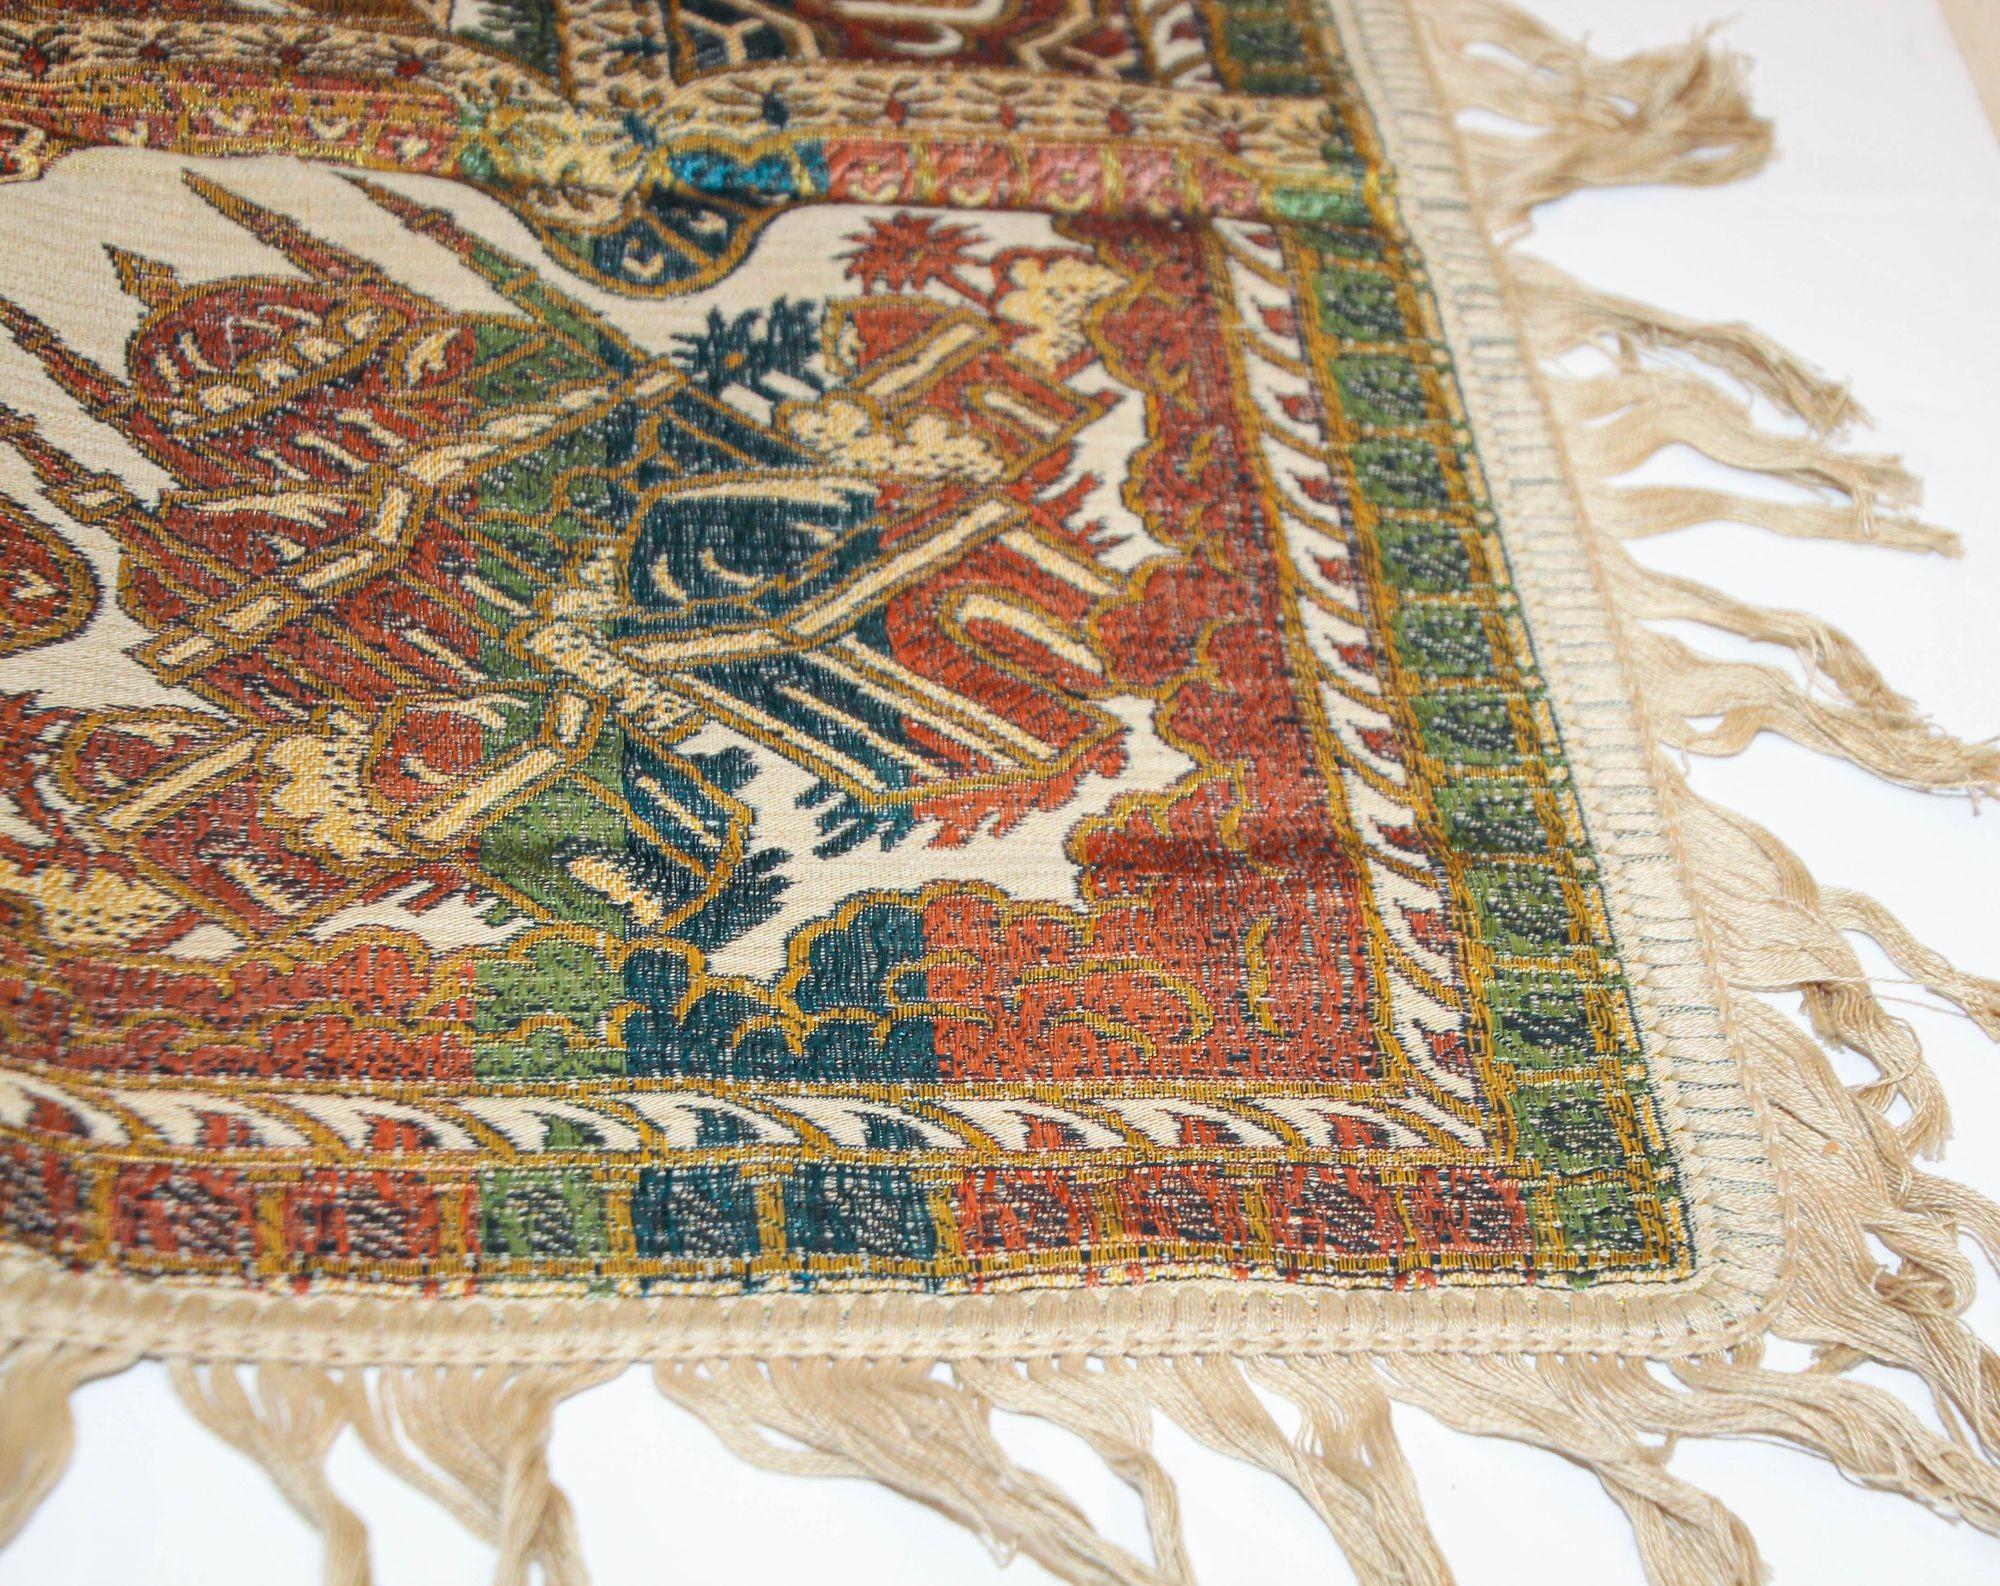 1940s Granada Islamic Spain Textile with Arabic Calligraphy Writing For Sale 9